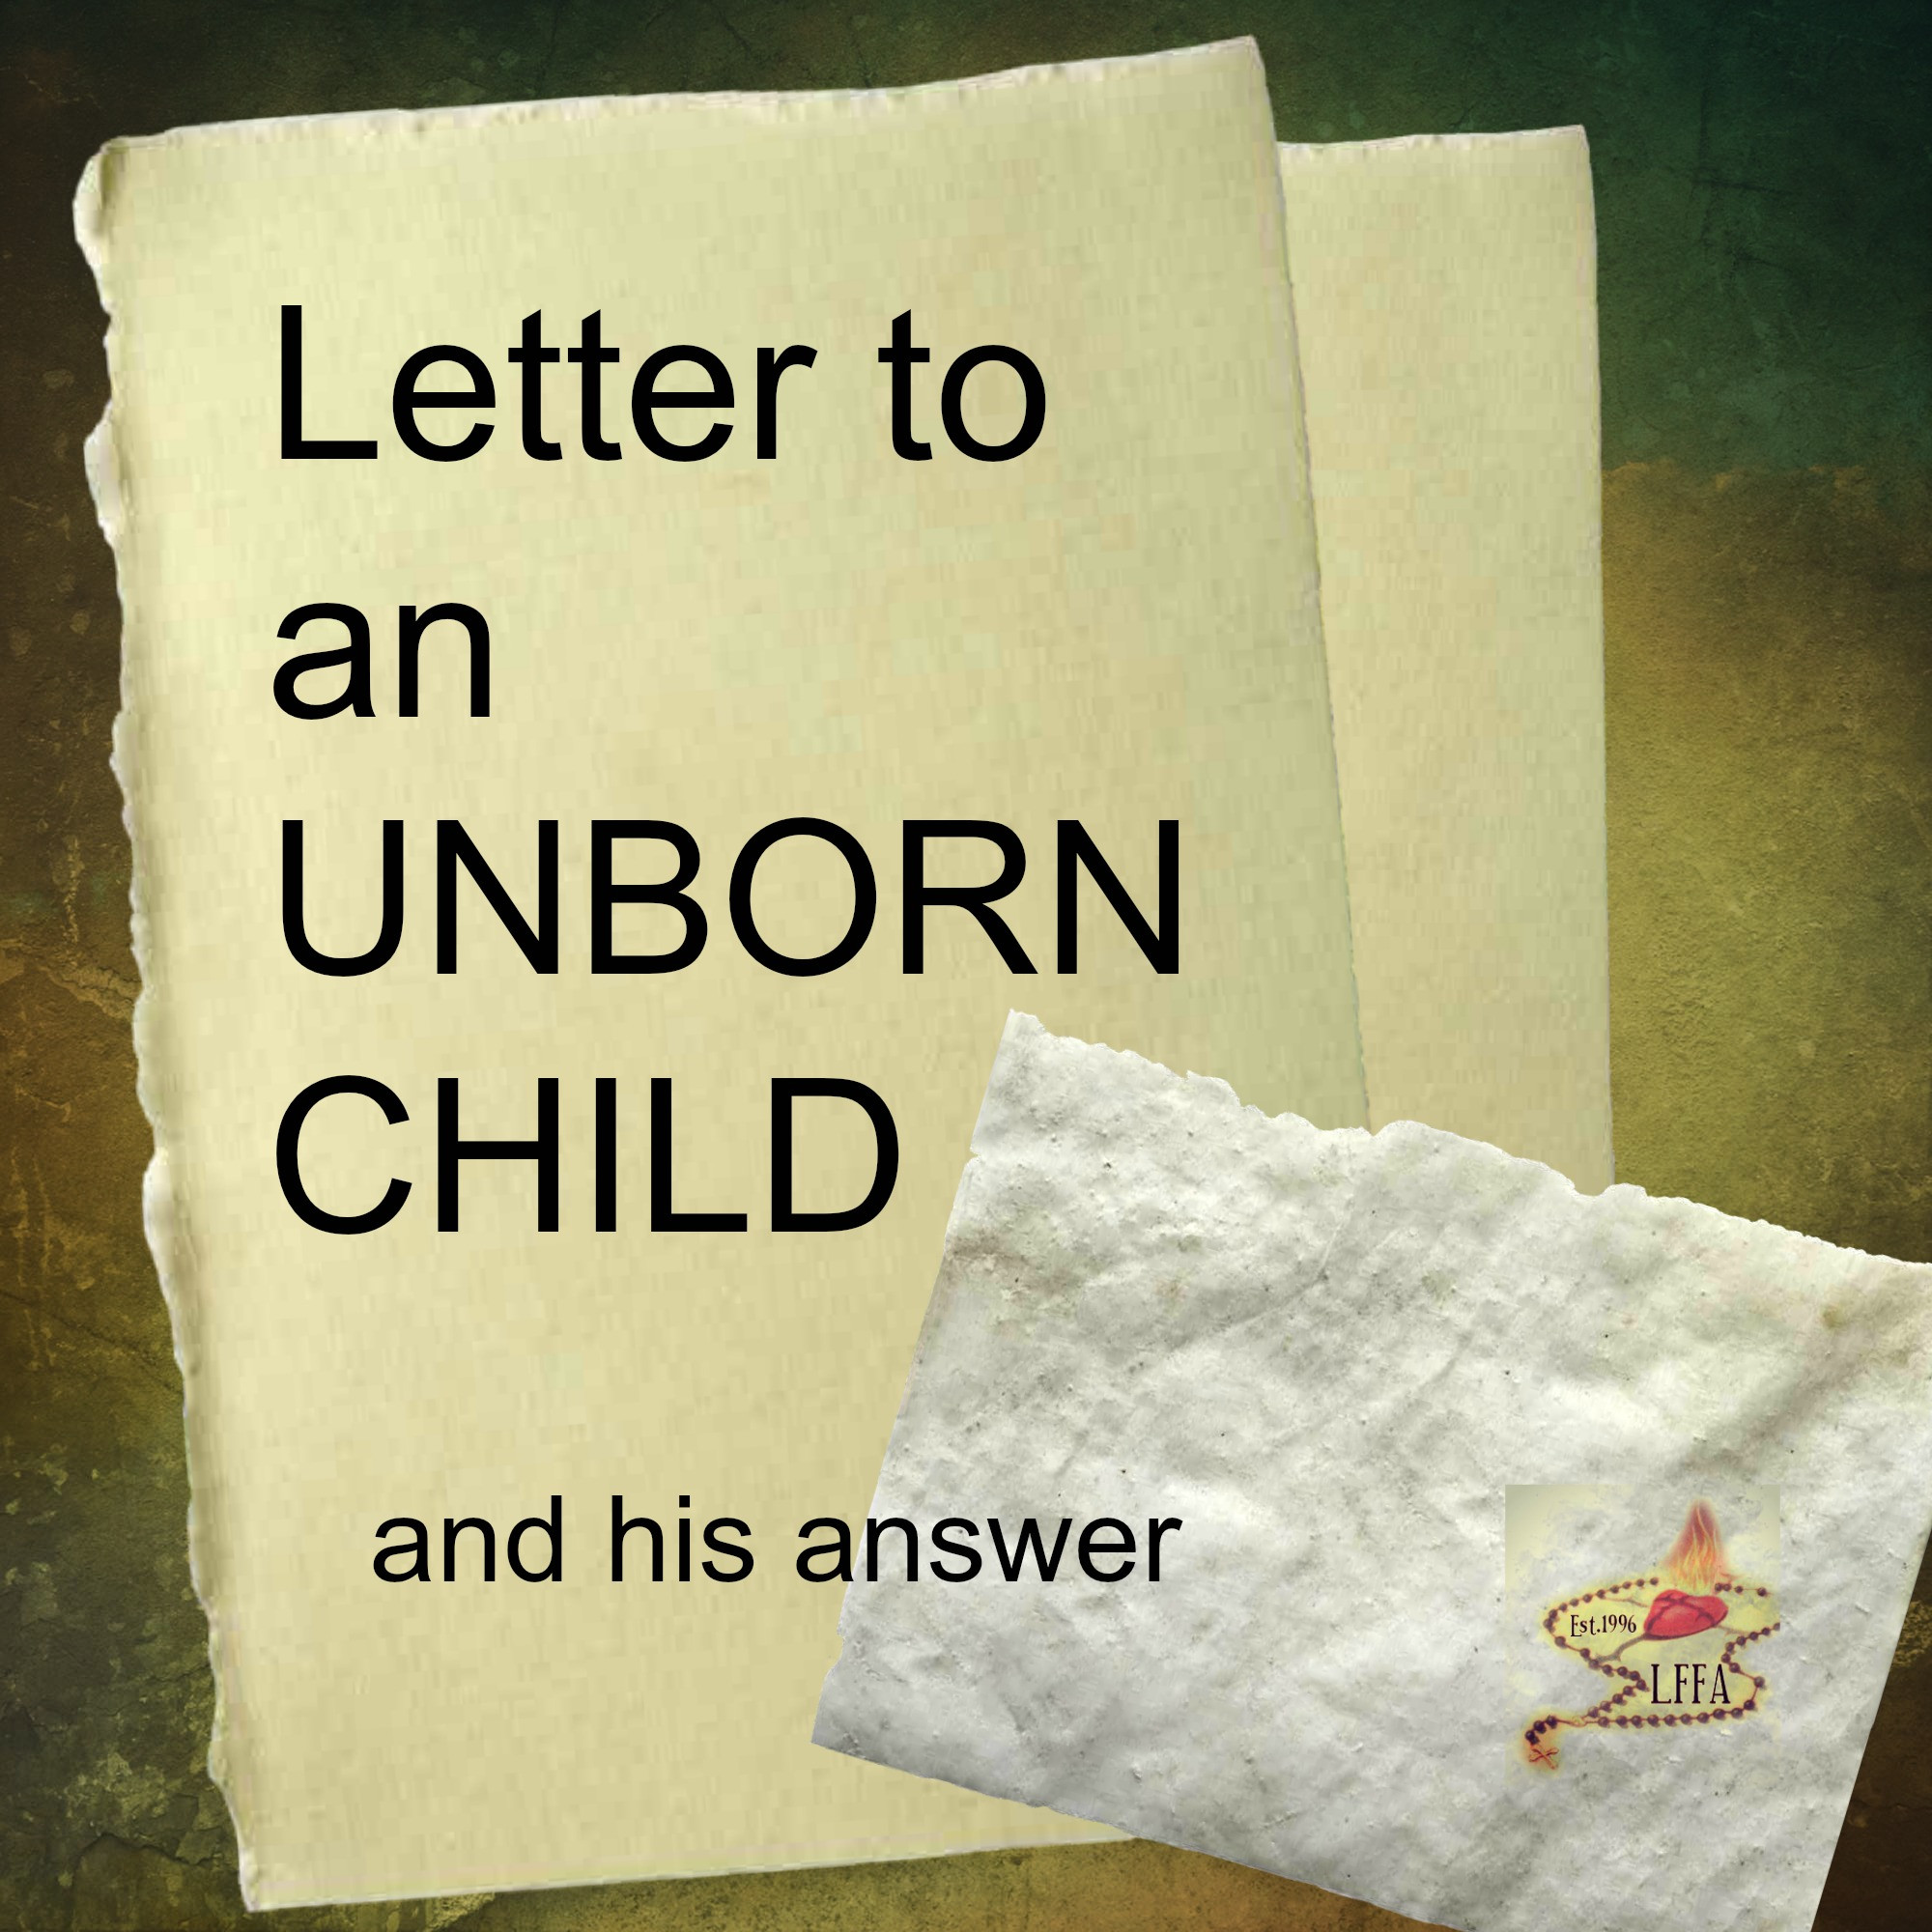 Unborn Baby Quotes And Sayings
 Daddy Quotes For Unborn Baby QuotesGram